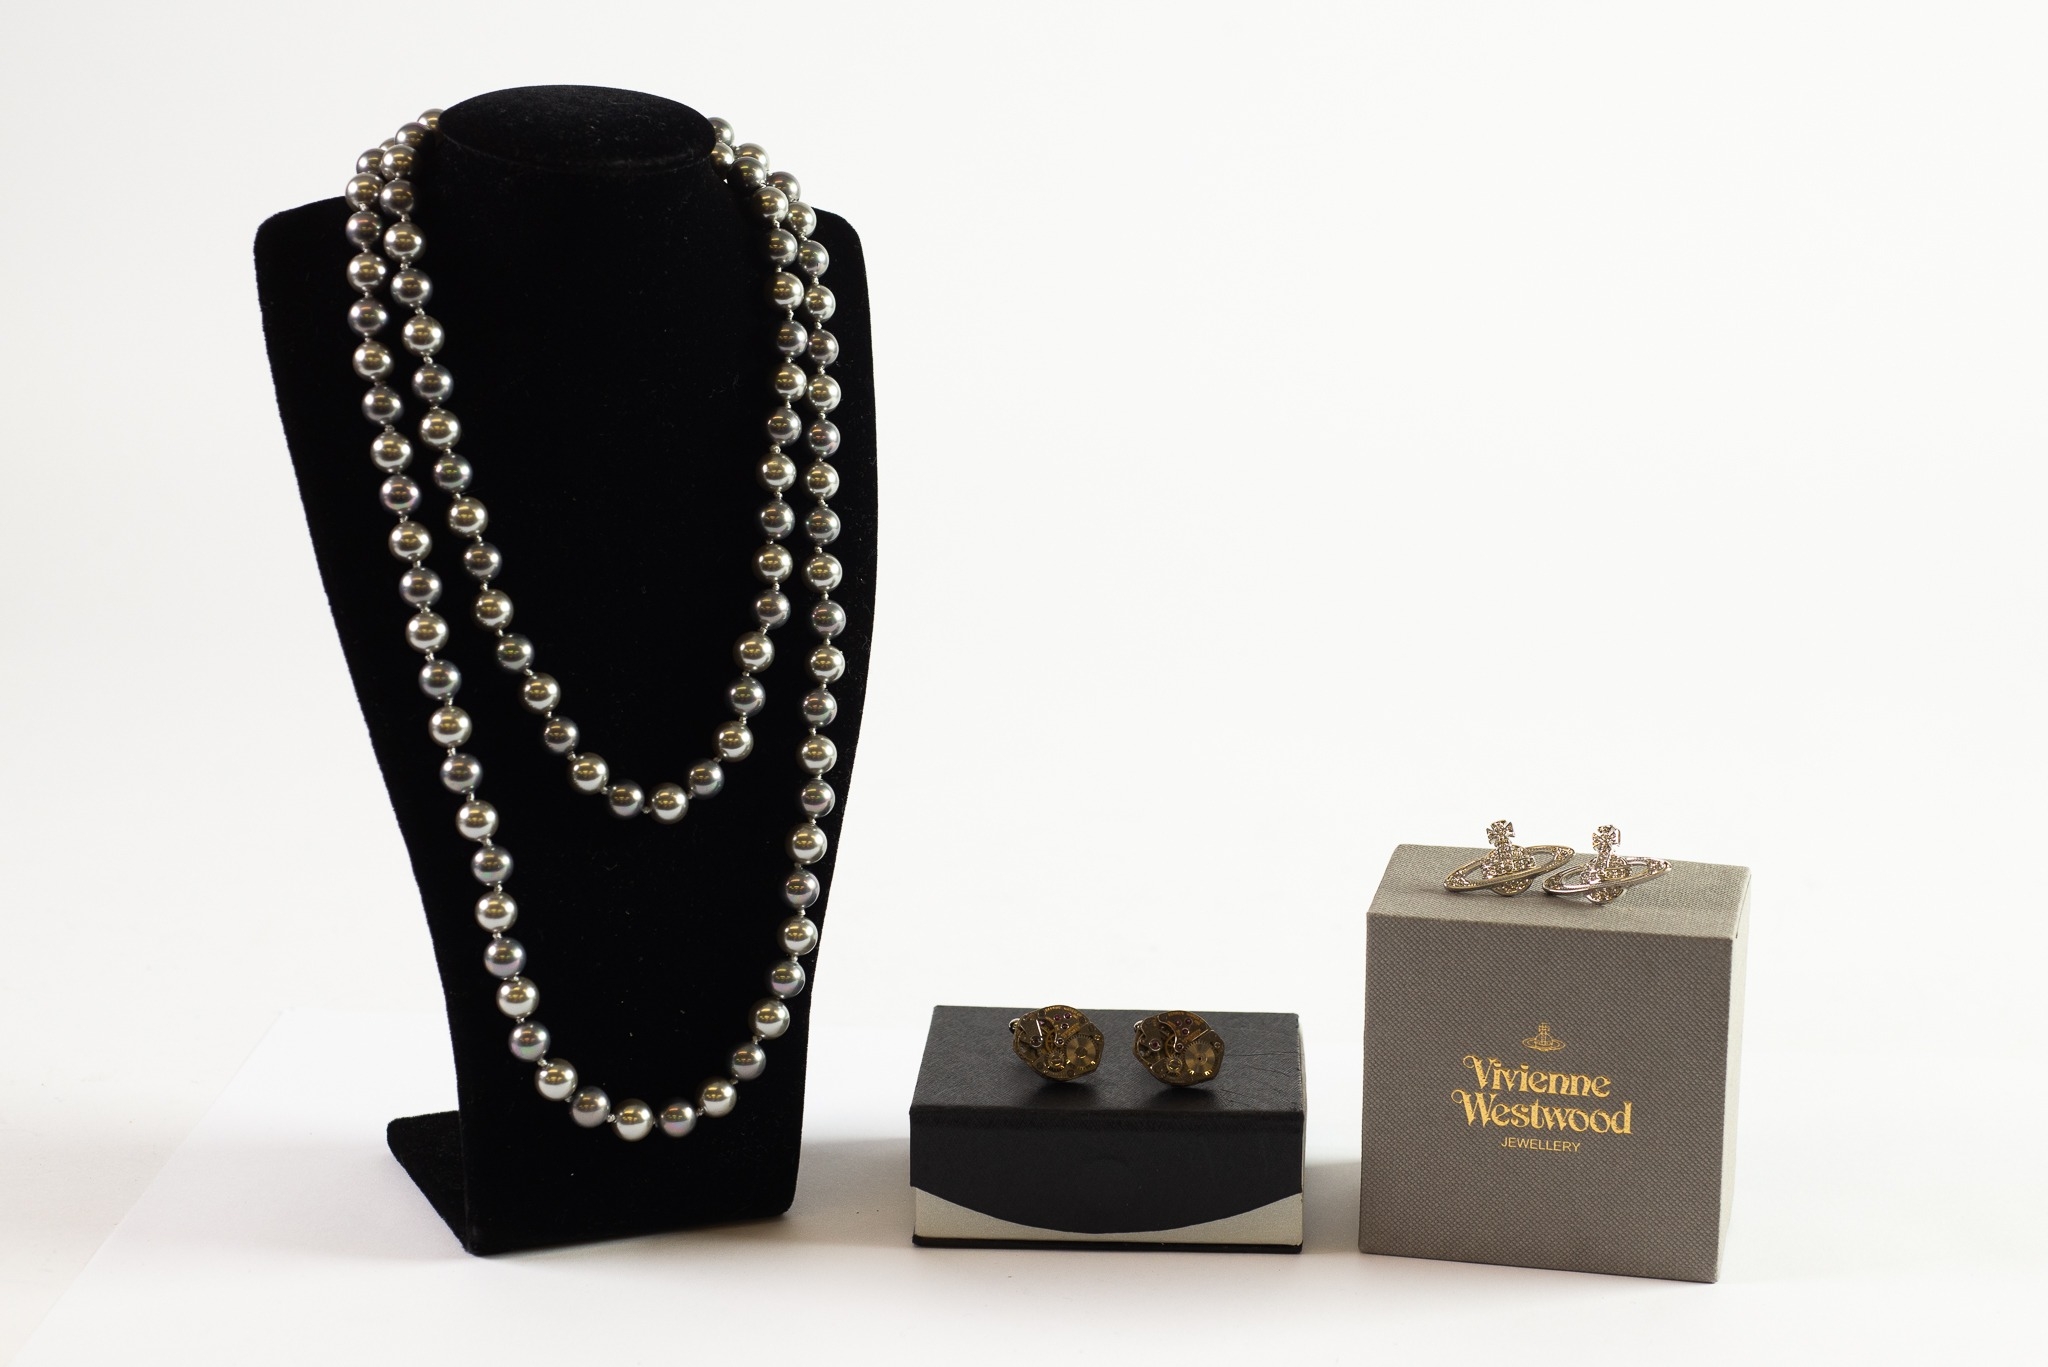 MODERN BLACK CULTURED PEARL NECKLACE, 34” (86.3cm) long, together with a PAIR OF VIVIENNE WESTWOOD